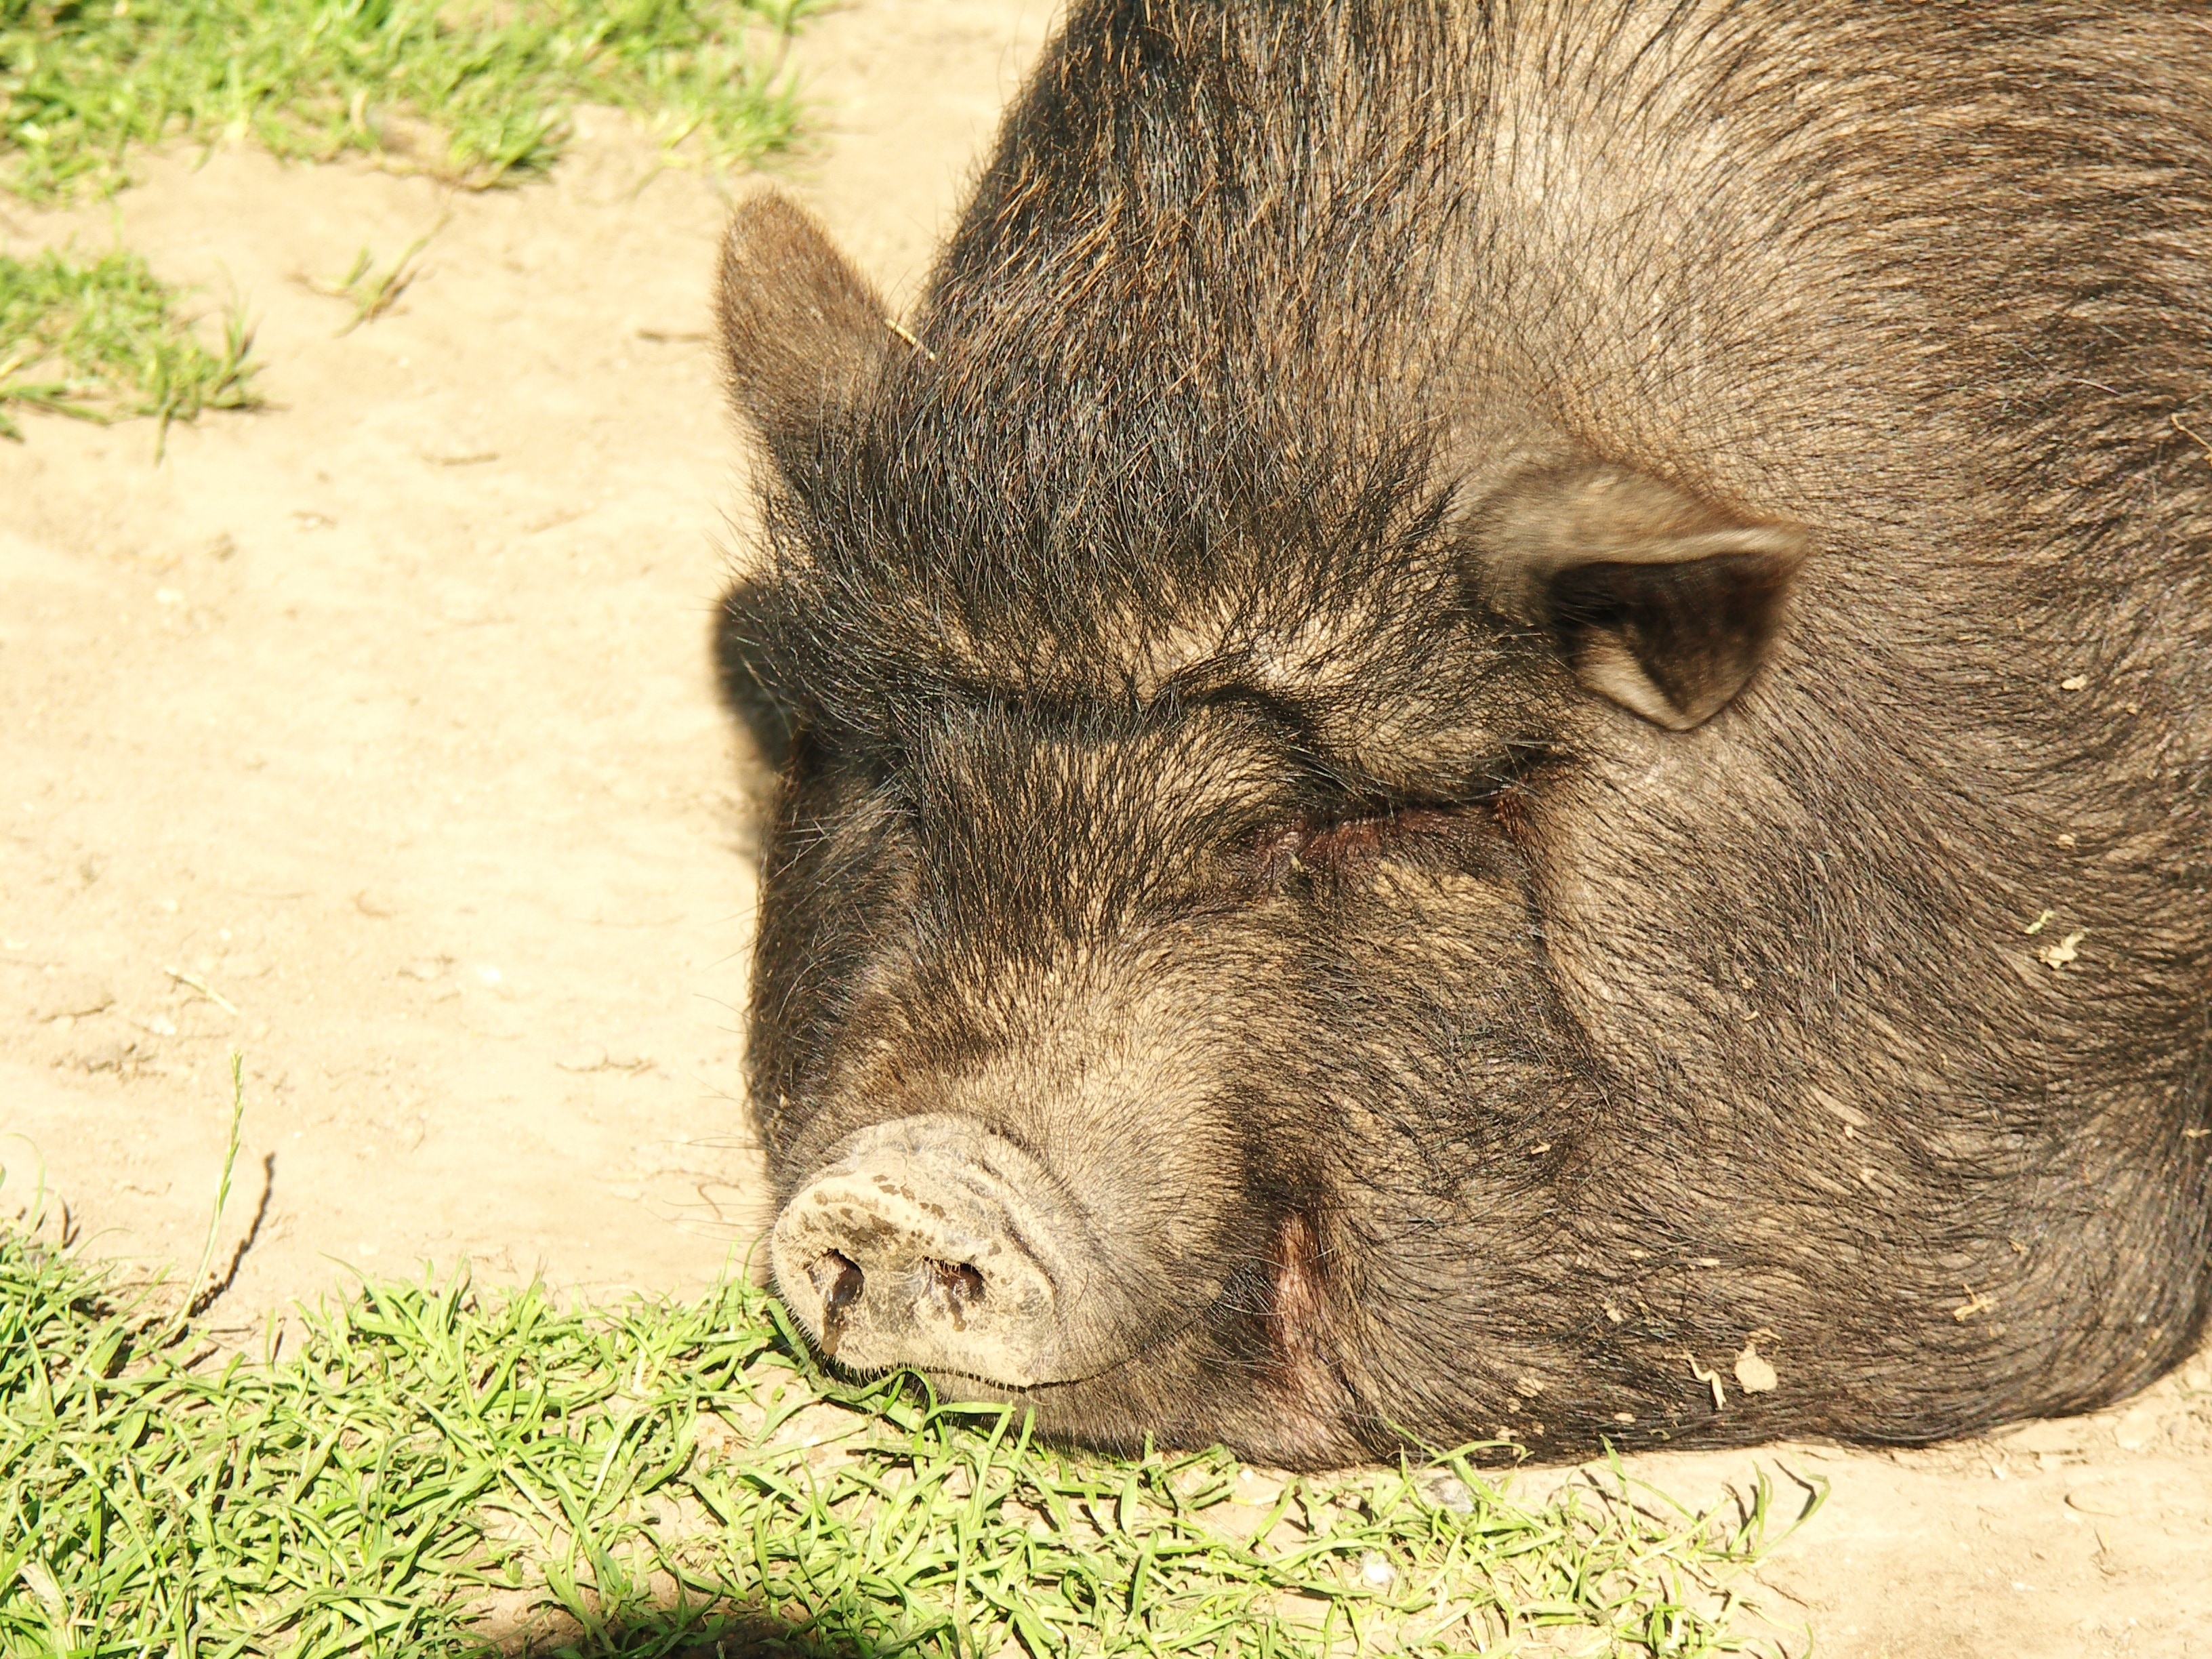 gray pig lying on soil with grass during daytime